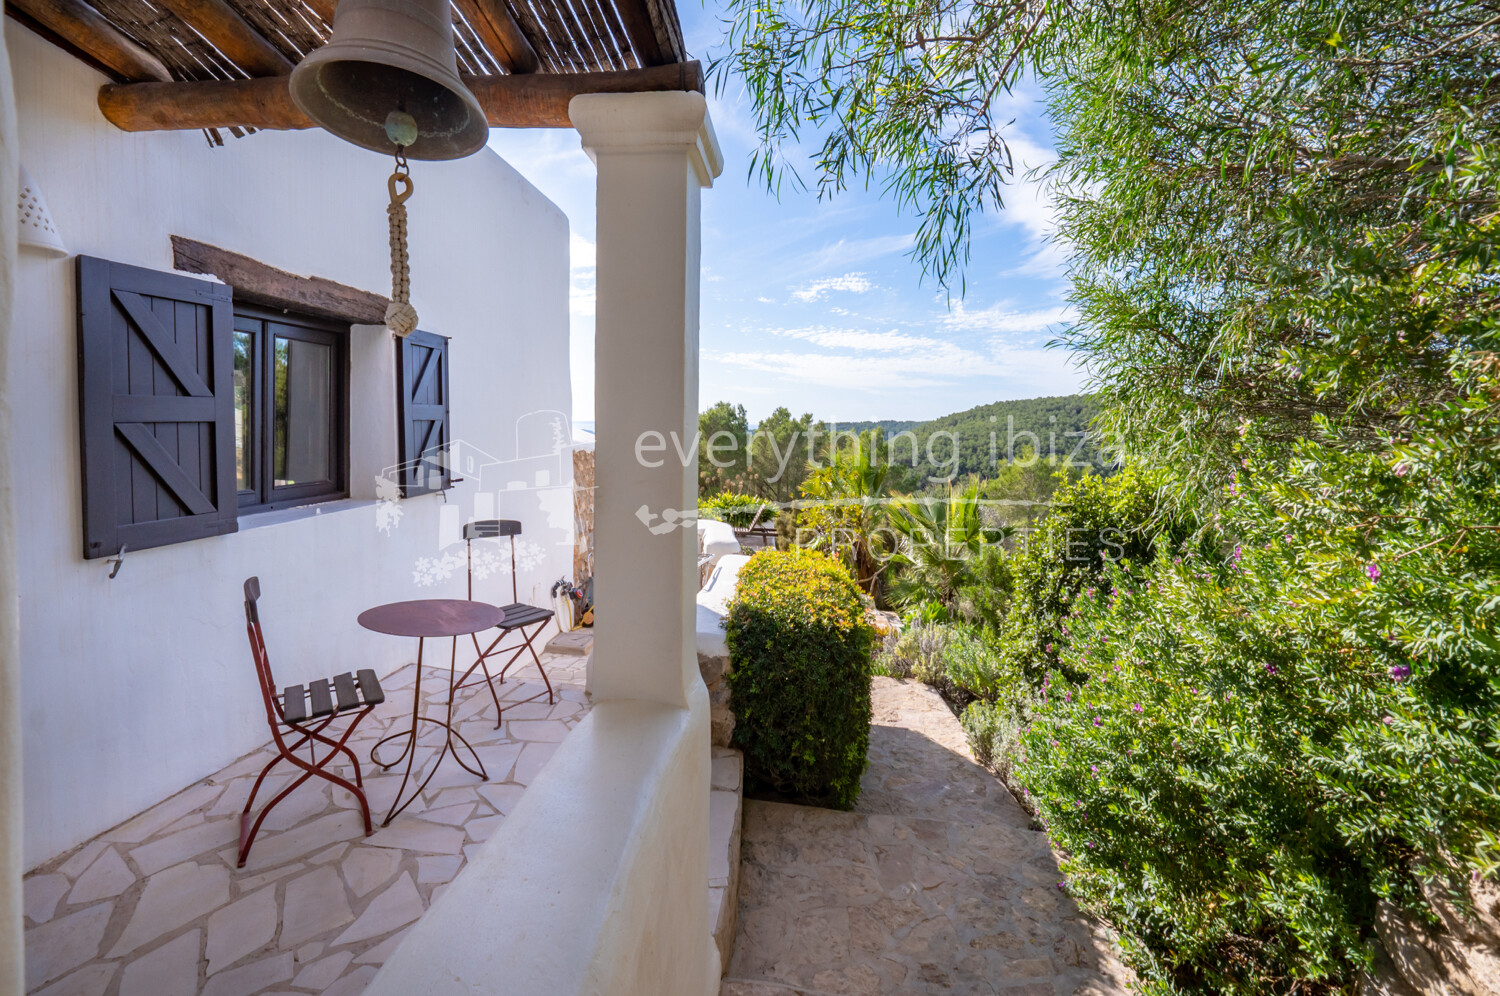 Authentic Country Finca with Sea and Rural Views, Tourist License and Infinity Pool,ref. 1668, for sale in Ibiza by everything ibiza Properties